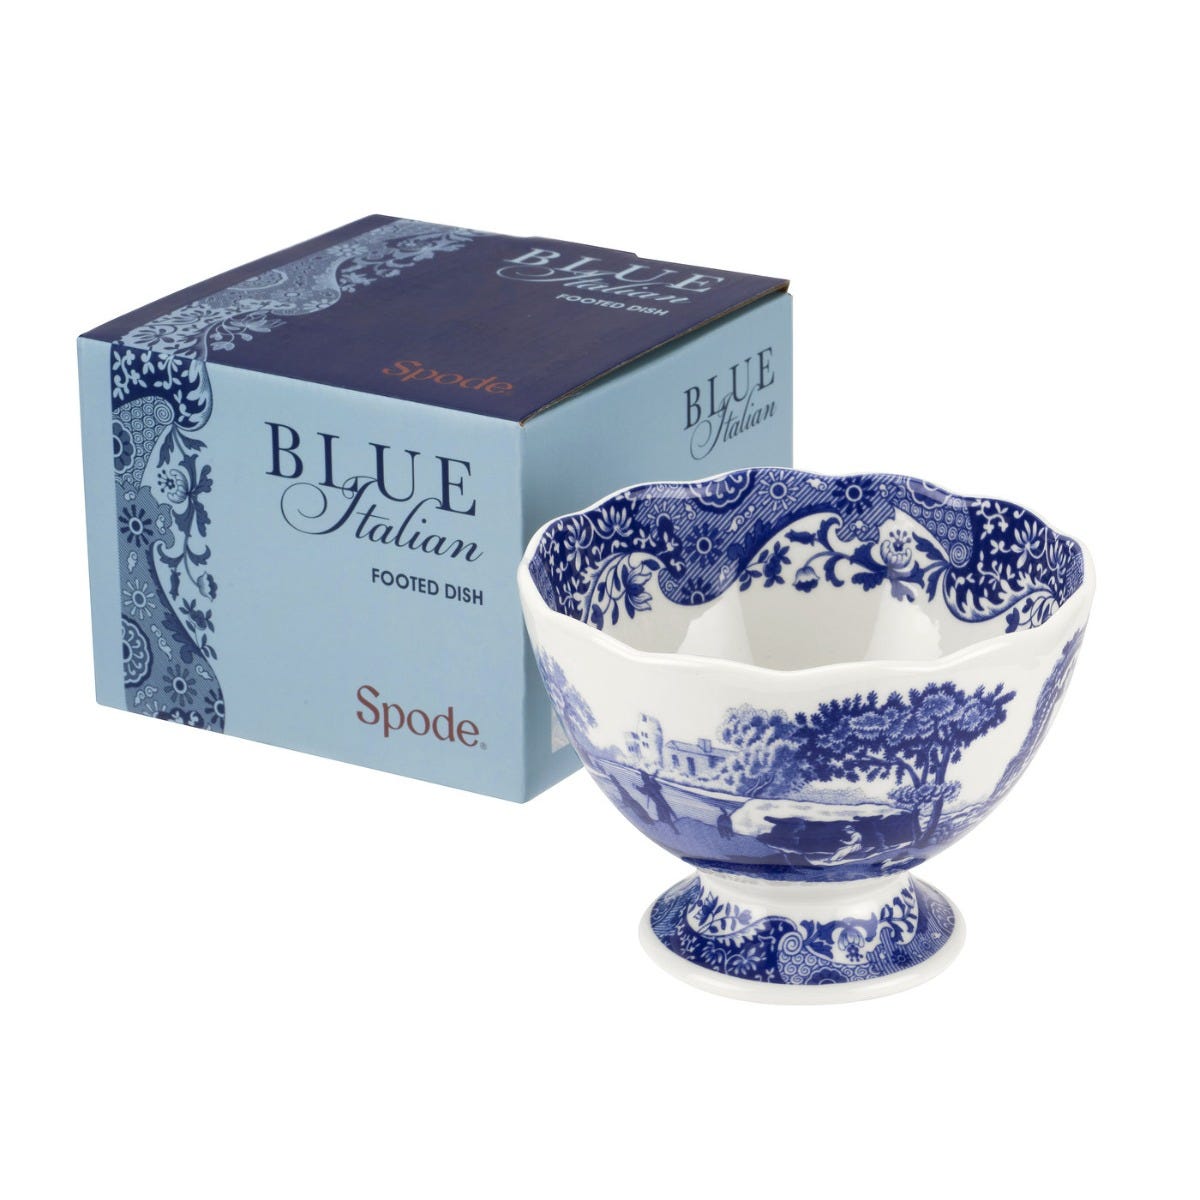 Spode Blue Italian Footed Dish